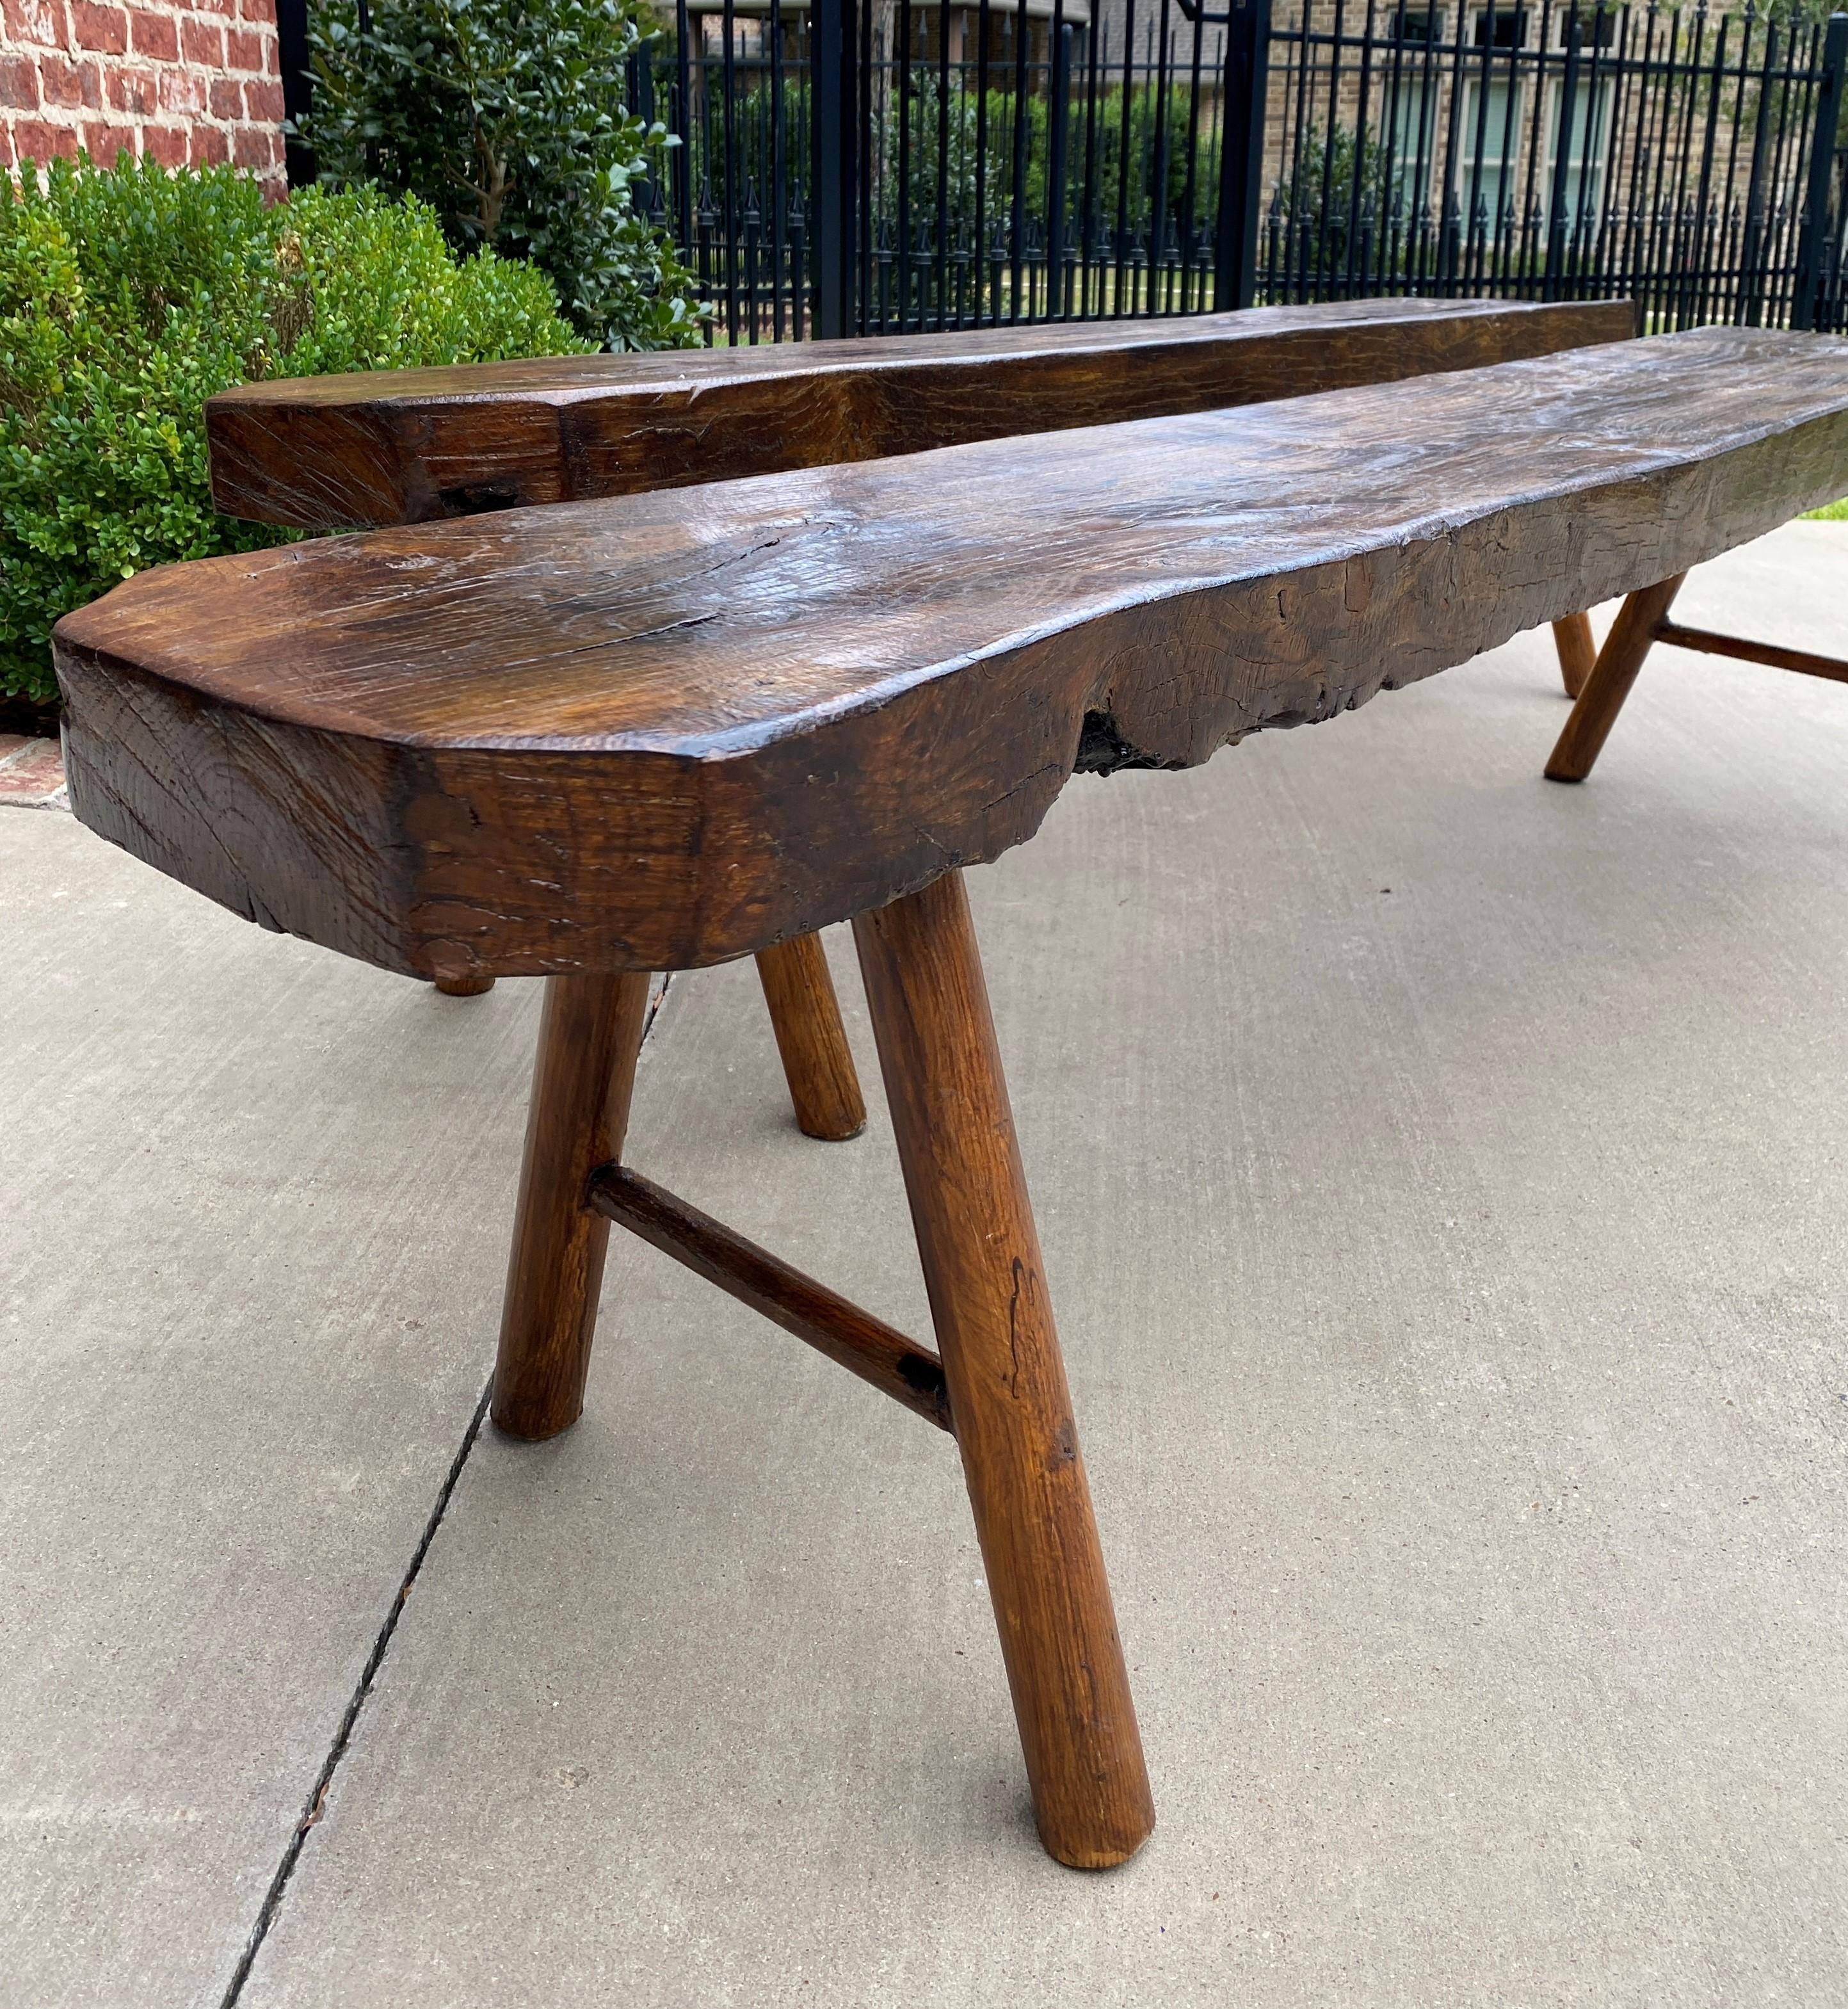 Outstanding Pair Antique French Country or Farmhouse Rustic benches, Banquette or Window Seats~~c. 1880s

 Rarely do we find a matching PAIR of benches~~19th century French Country with a great rustic or farmhouse look~~these benches are always in